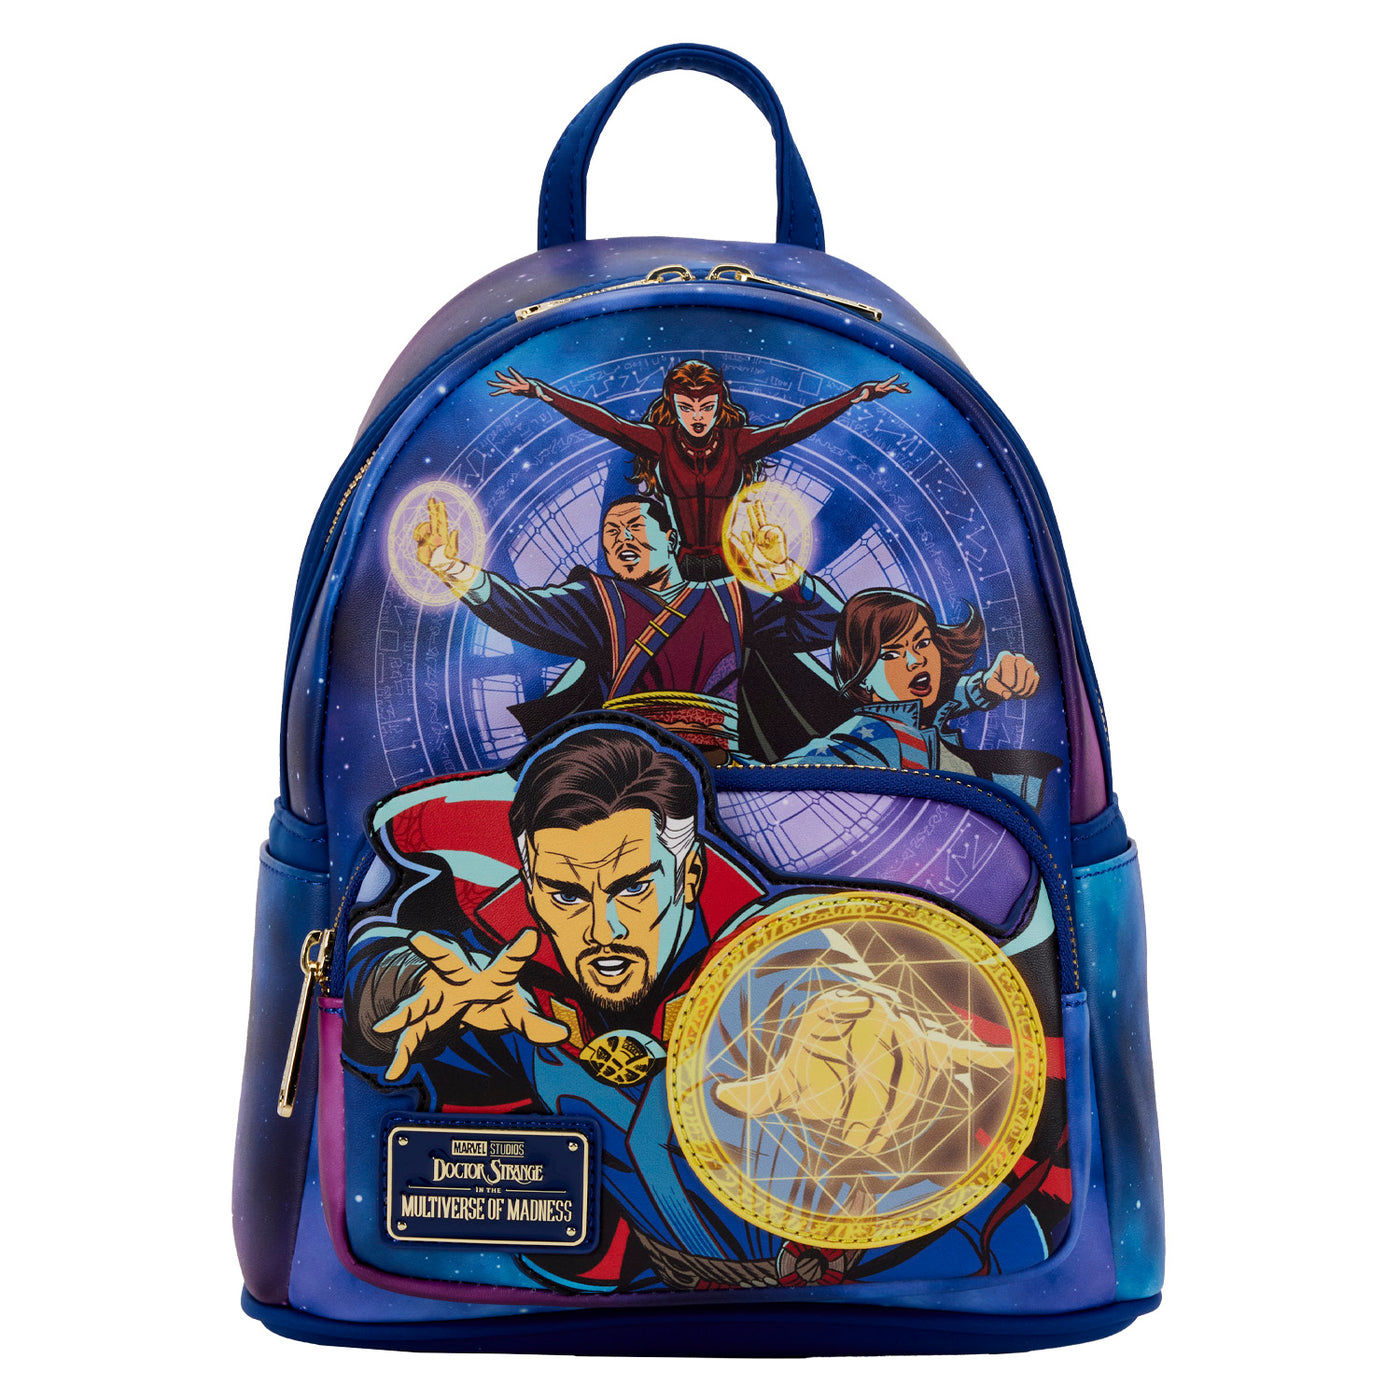 Loungefly Marvel Dr. Strange & The Multiverse of Madness Mini Backpack